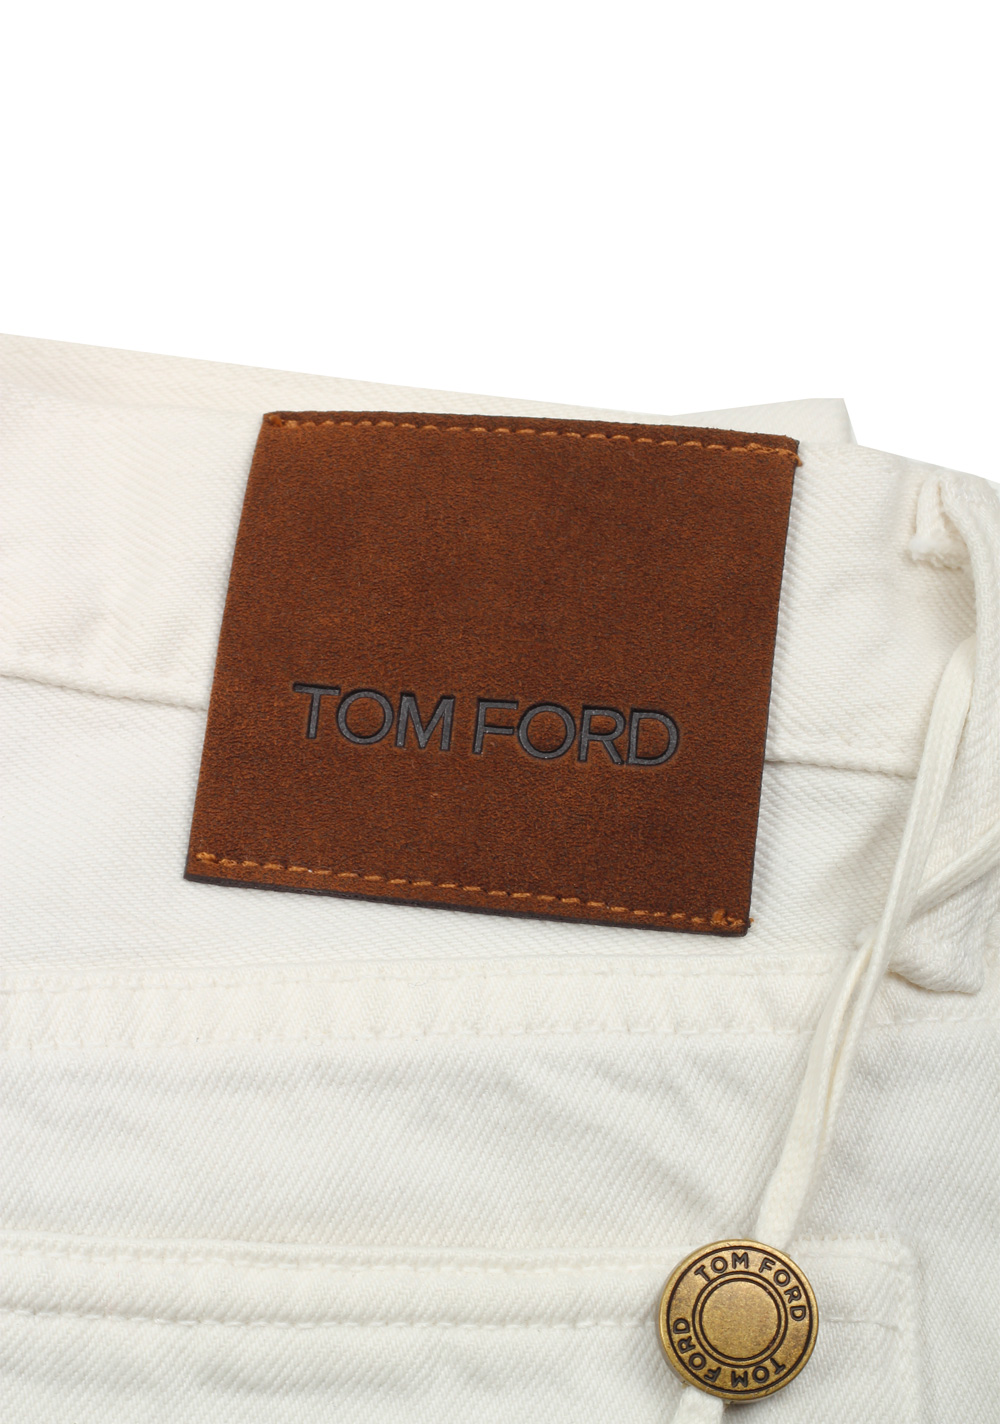 TOM FORD Slim Off White Jeans TFD001 Size 49 / 33 U.S. | Costume Limité